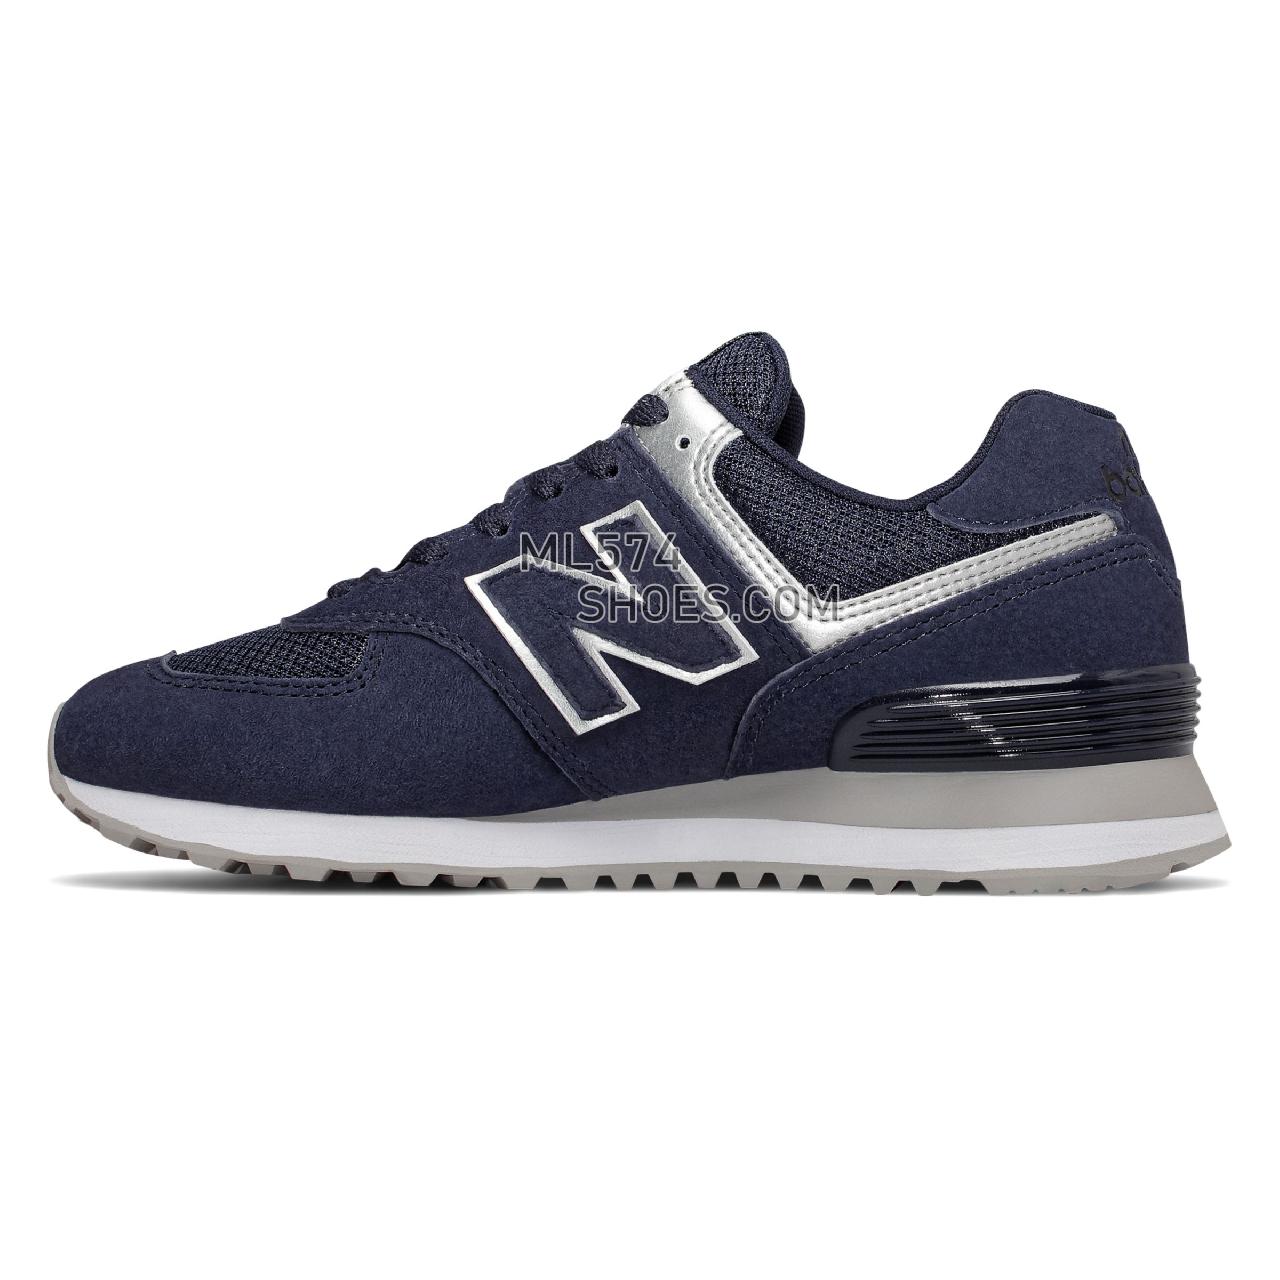 New Balance 574 Super Core - Women's 574 Classic - Pigment with Silver - WL574EY